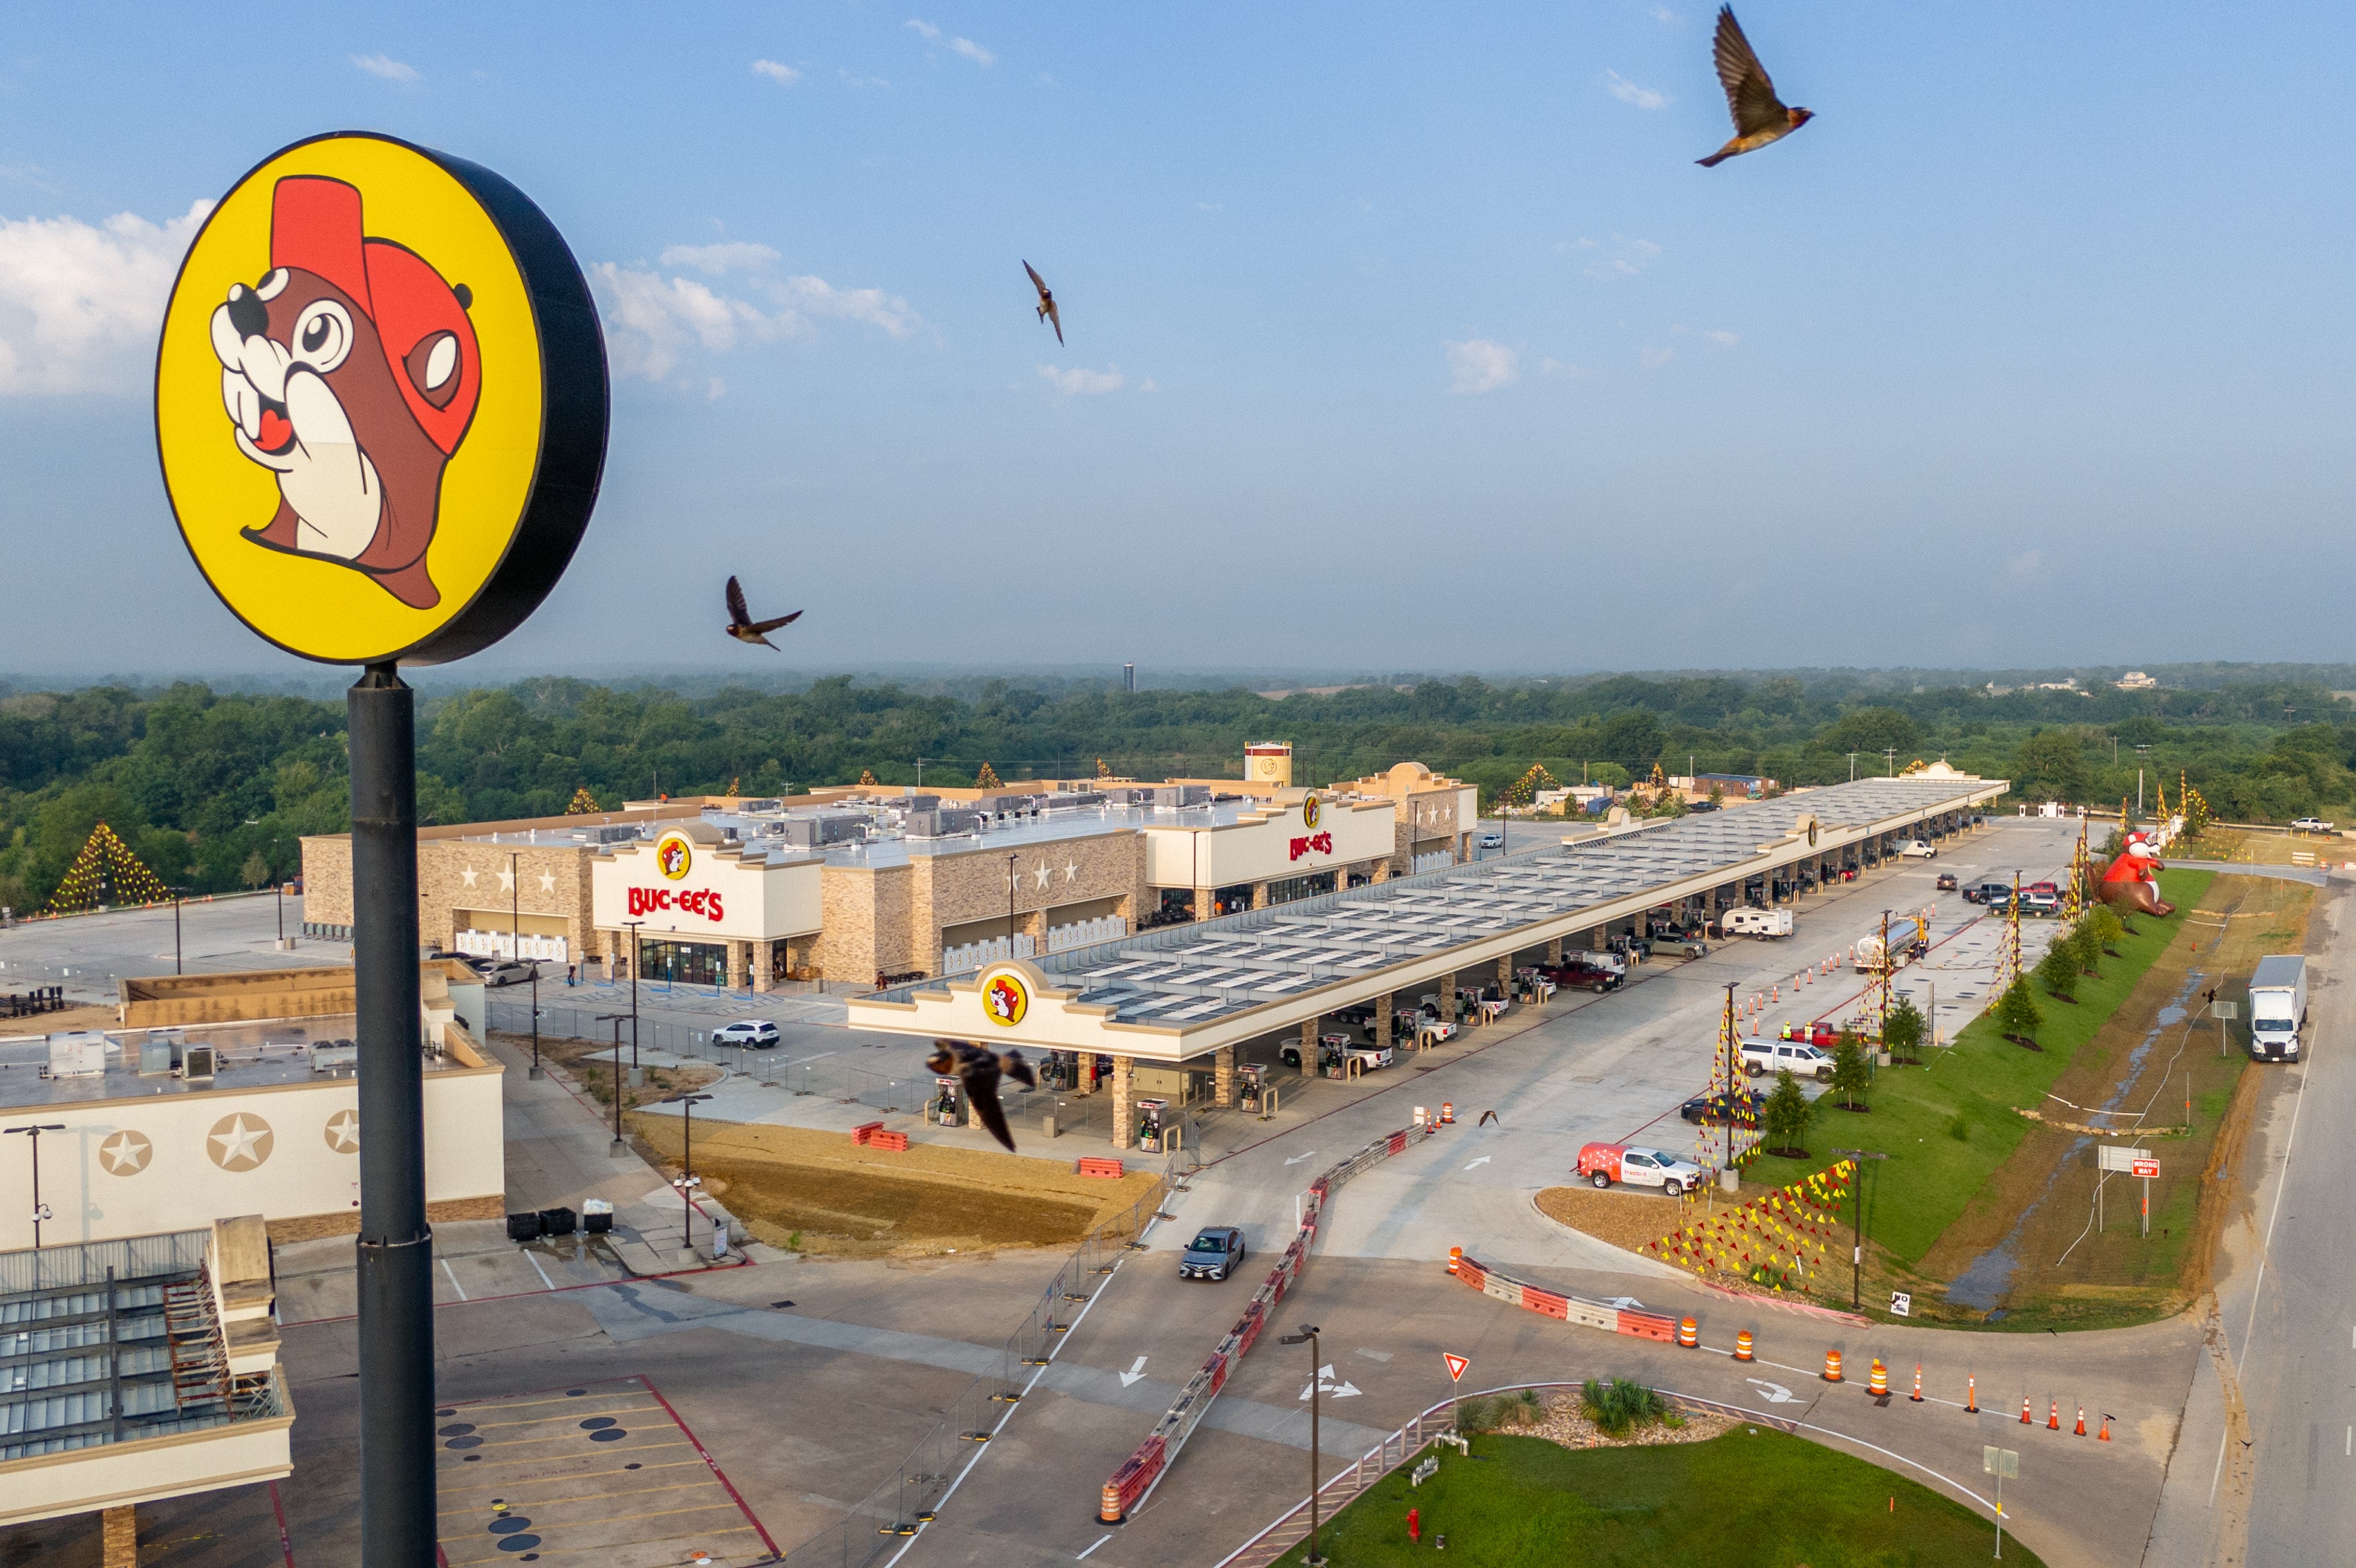 The original Buc-ee’s building opened more than two decades ago in 2003, but was replaced by a brand new center, directly across the road, which opened on June 10